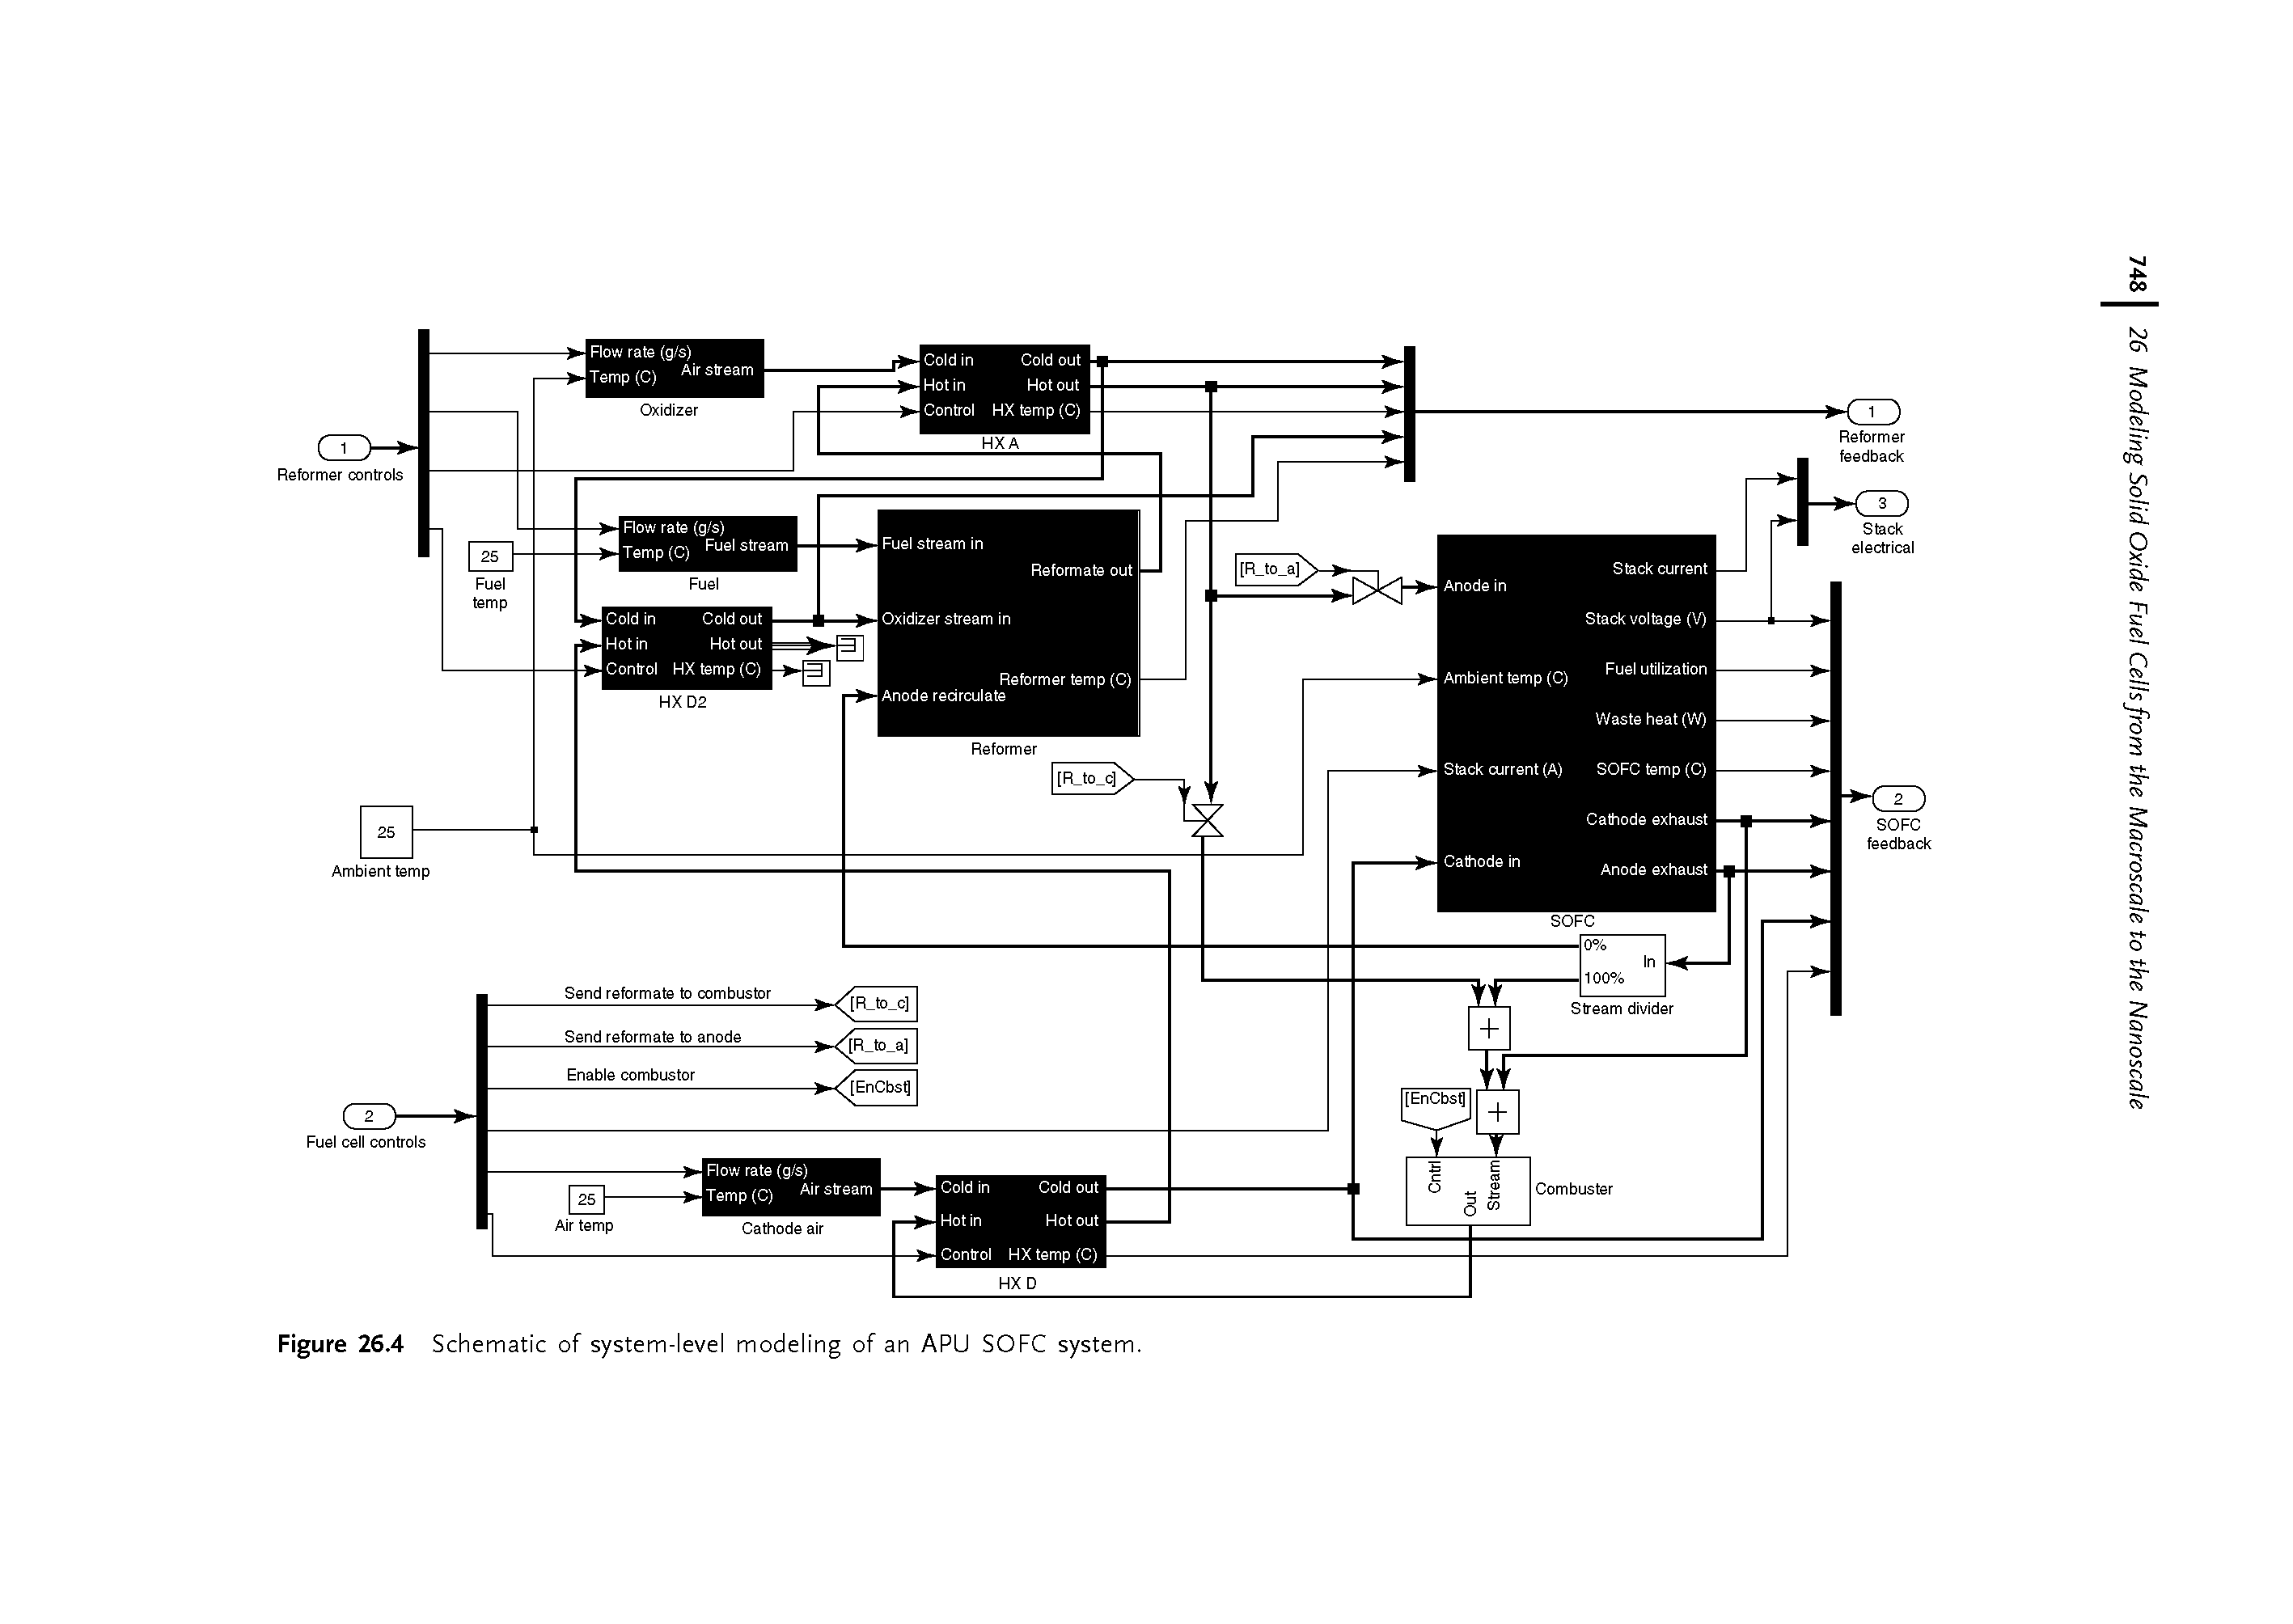 Figure 26.4 Schematic of system-level modeling of an APU SOFC system.